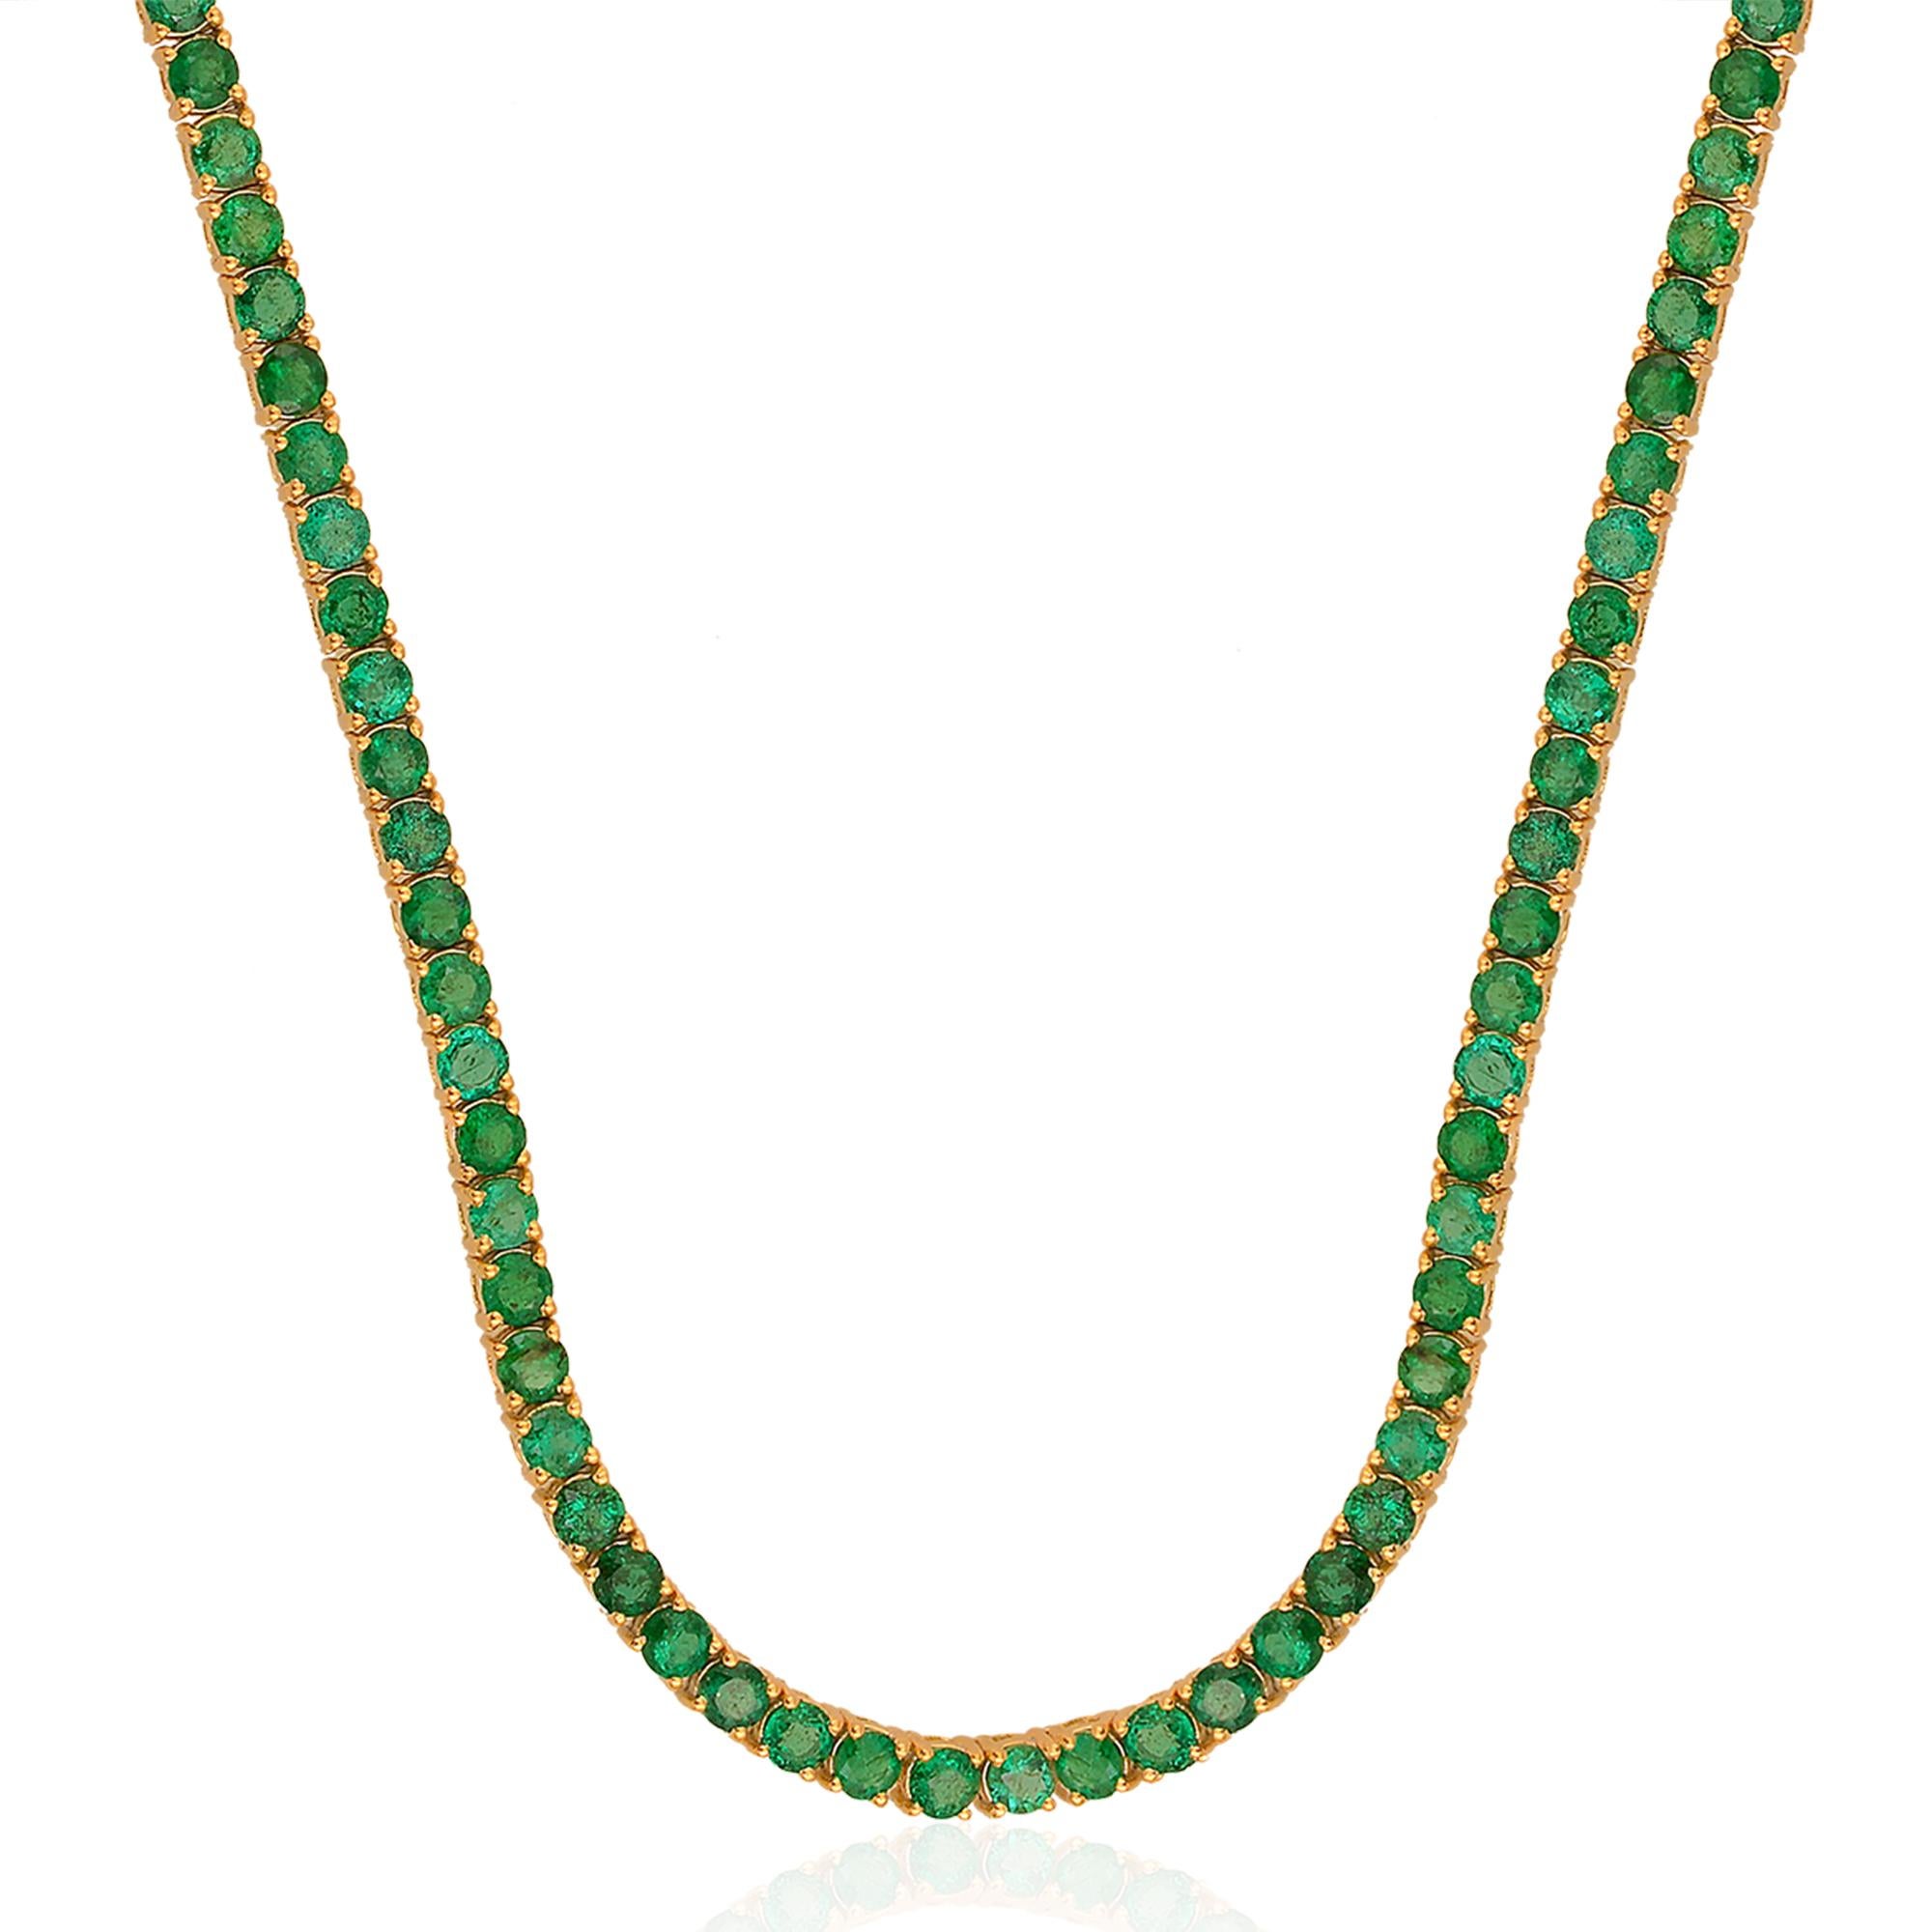 A dazzling touch of Emerald over the 14k Yellow Gold base which adds up to the elegance of the ornament. An elegant Necklace of adornment that would definitely grab attention!

✧✧Welcome To Our Shop Spectrum Jewels India✧✧

